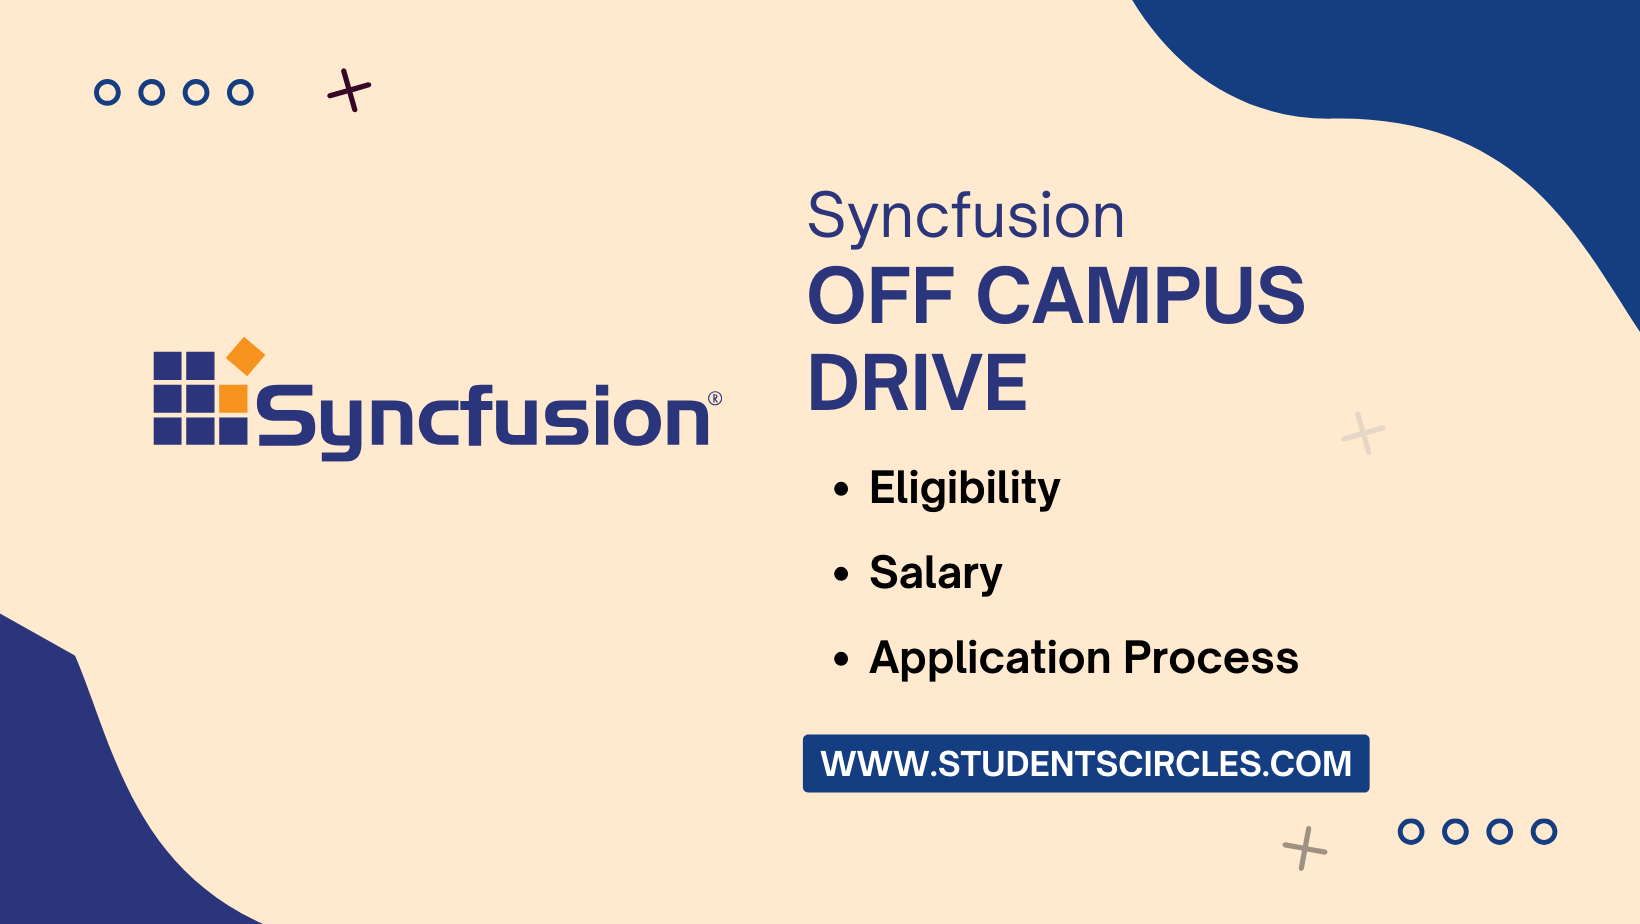 Syncfusion Off Campus Drive